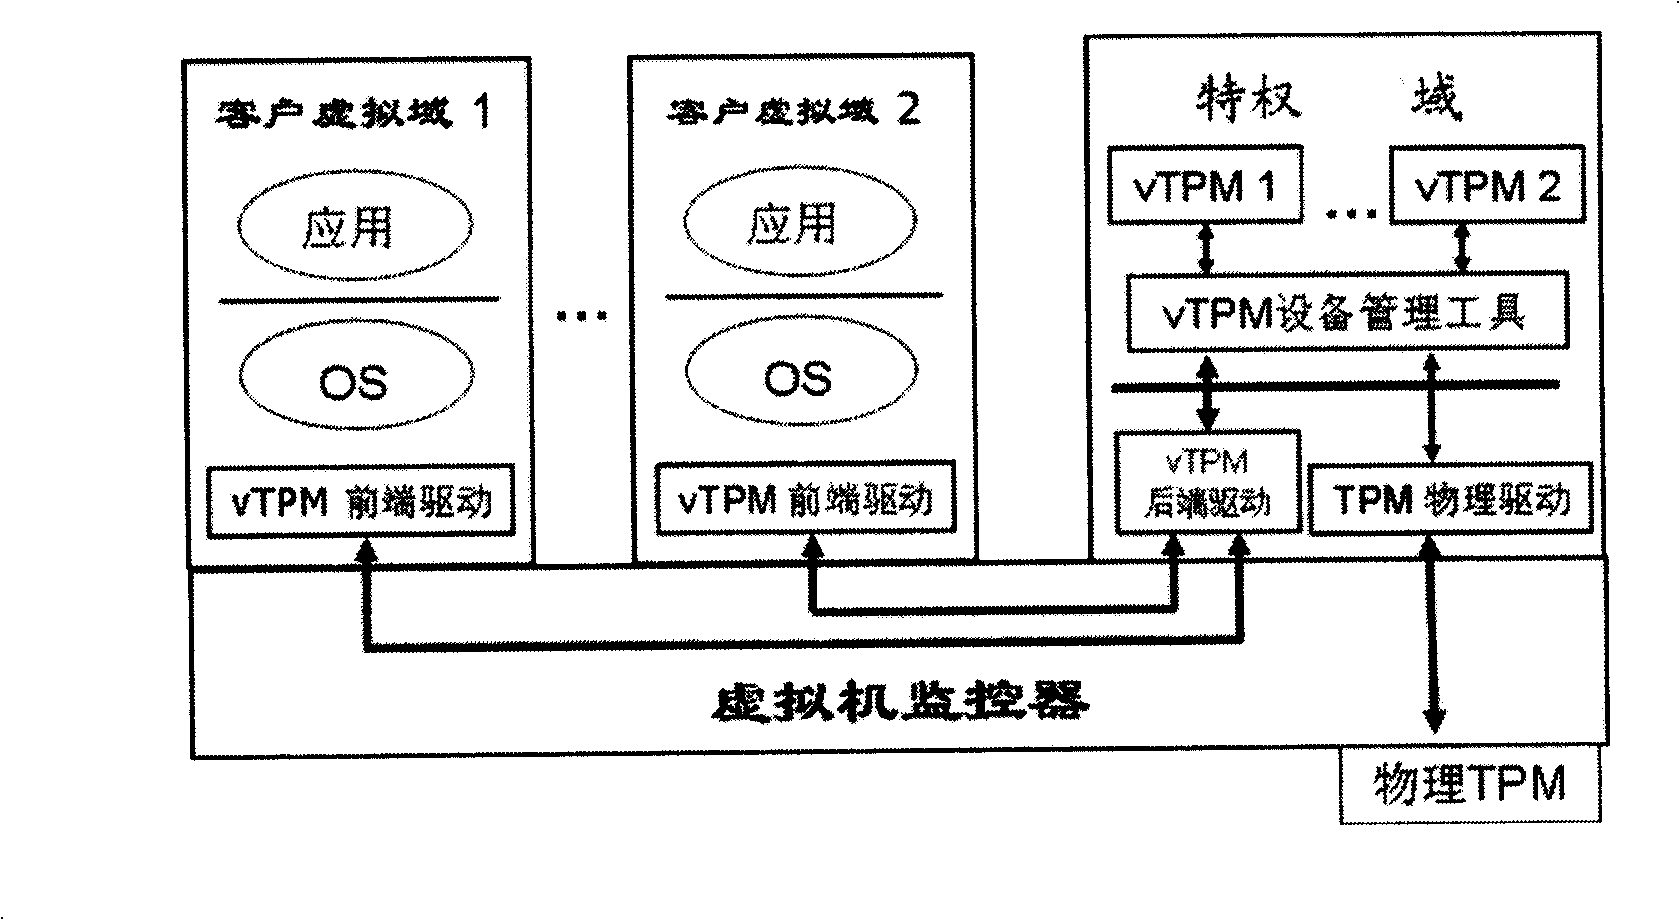 Method for self adaptedly safeguarding the normal starting of credible client virtual domain